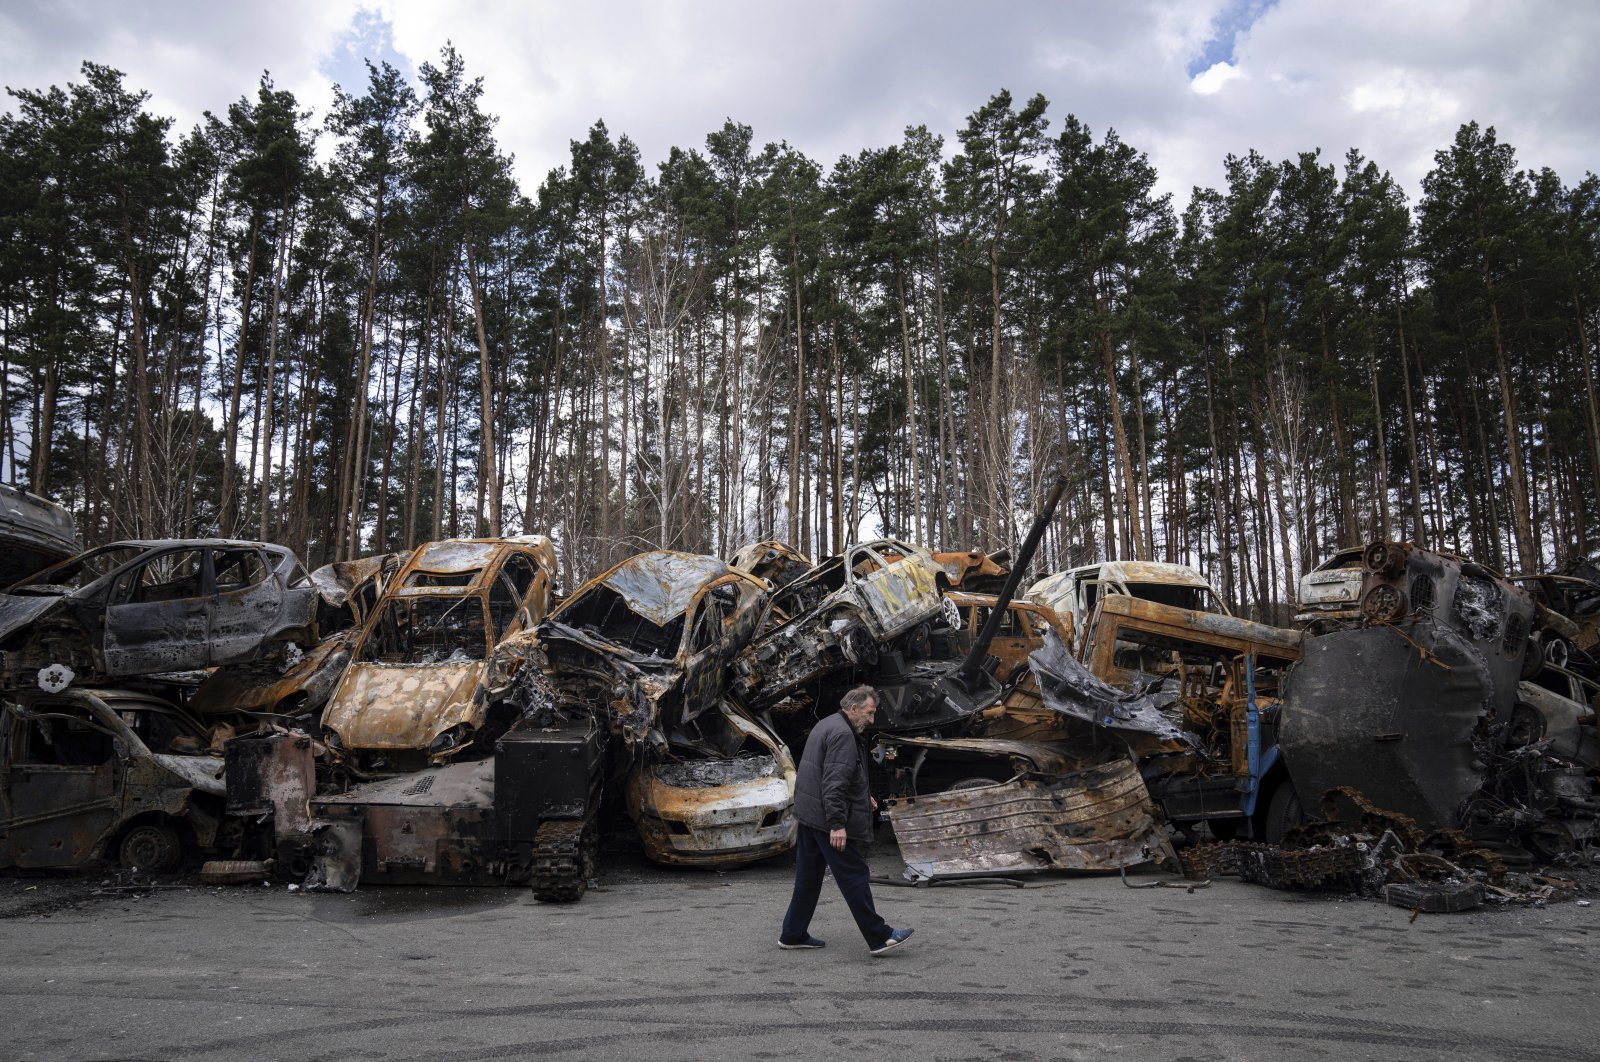 A man walks past a storage place for burned armed vehicles and cars, in the outskirts of Kyiv, Ukraine, April 11, 2022. (AP Photo)